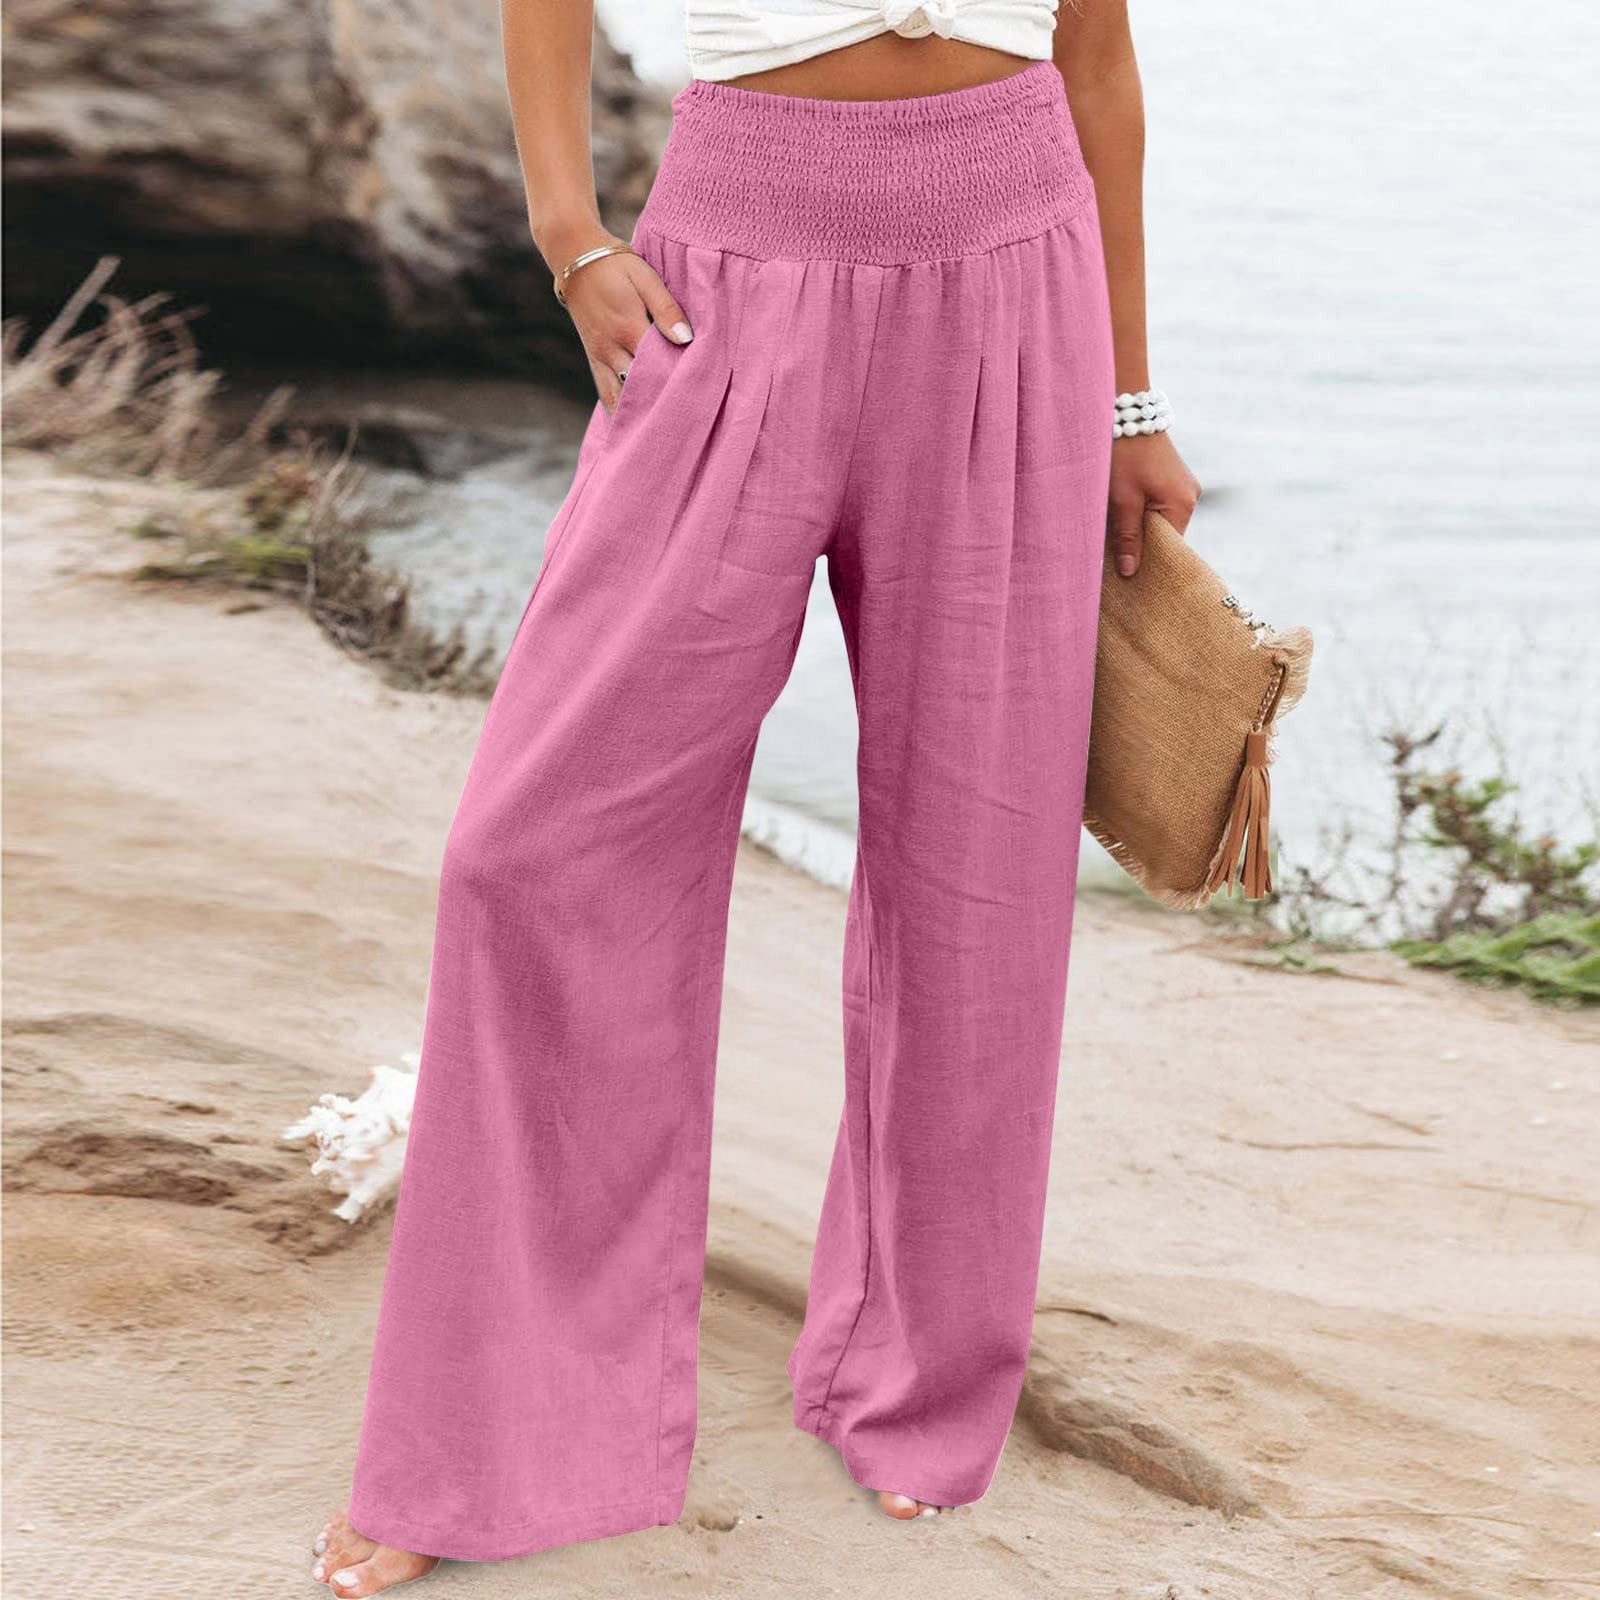 Best White Linen Pants for Women Versatile and Airy for a Beach Vacay